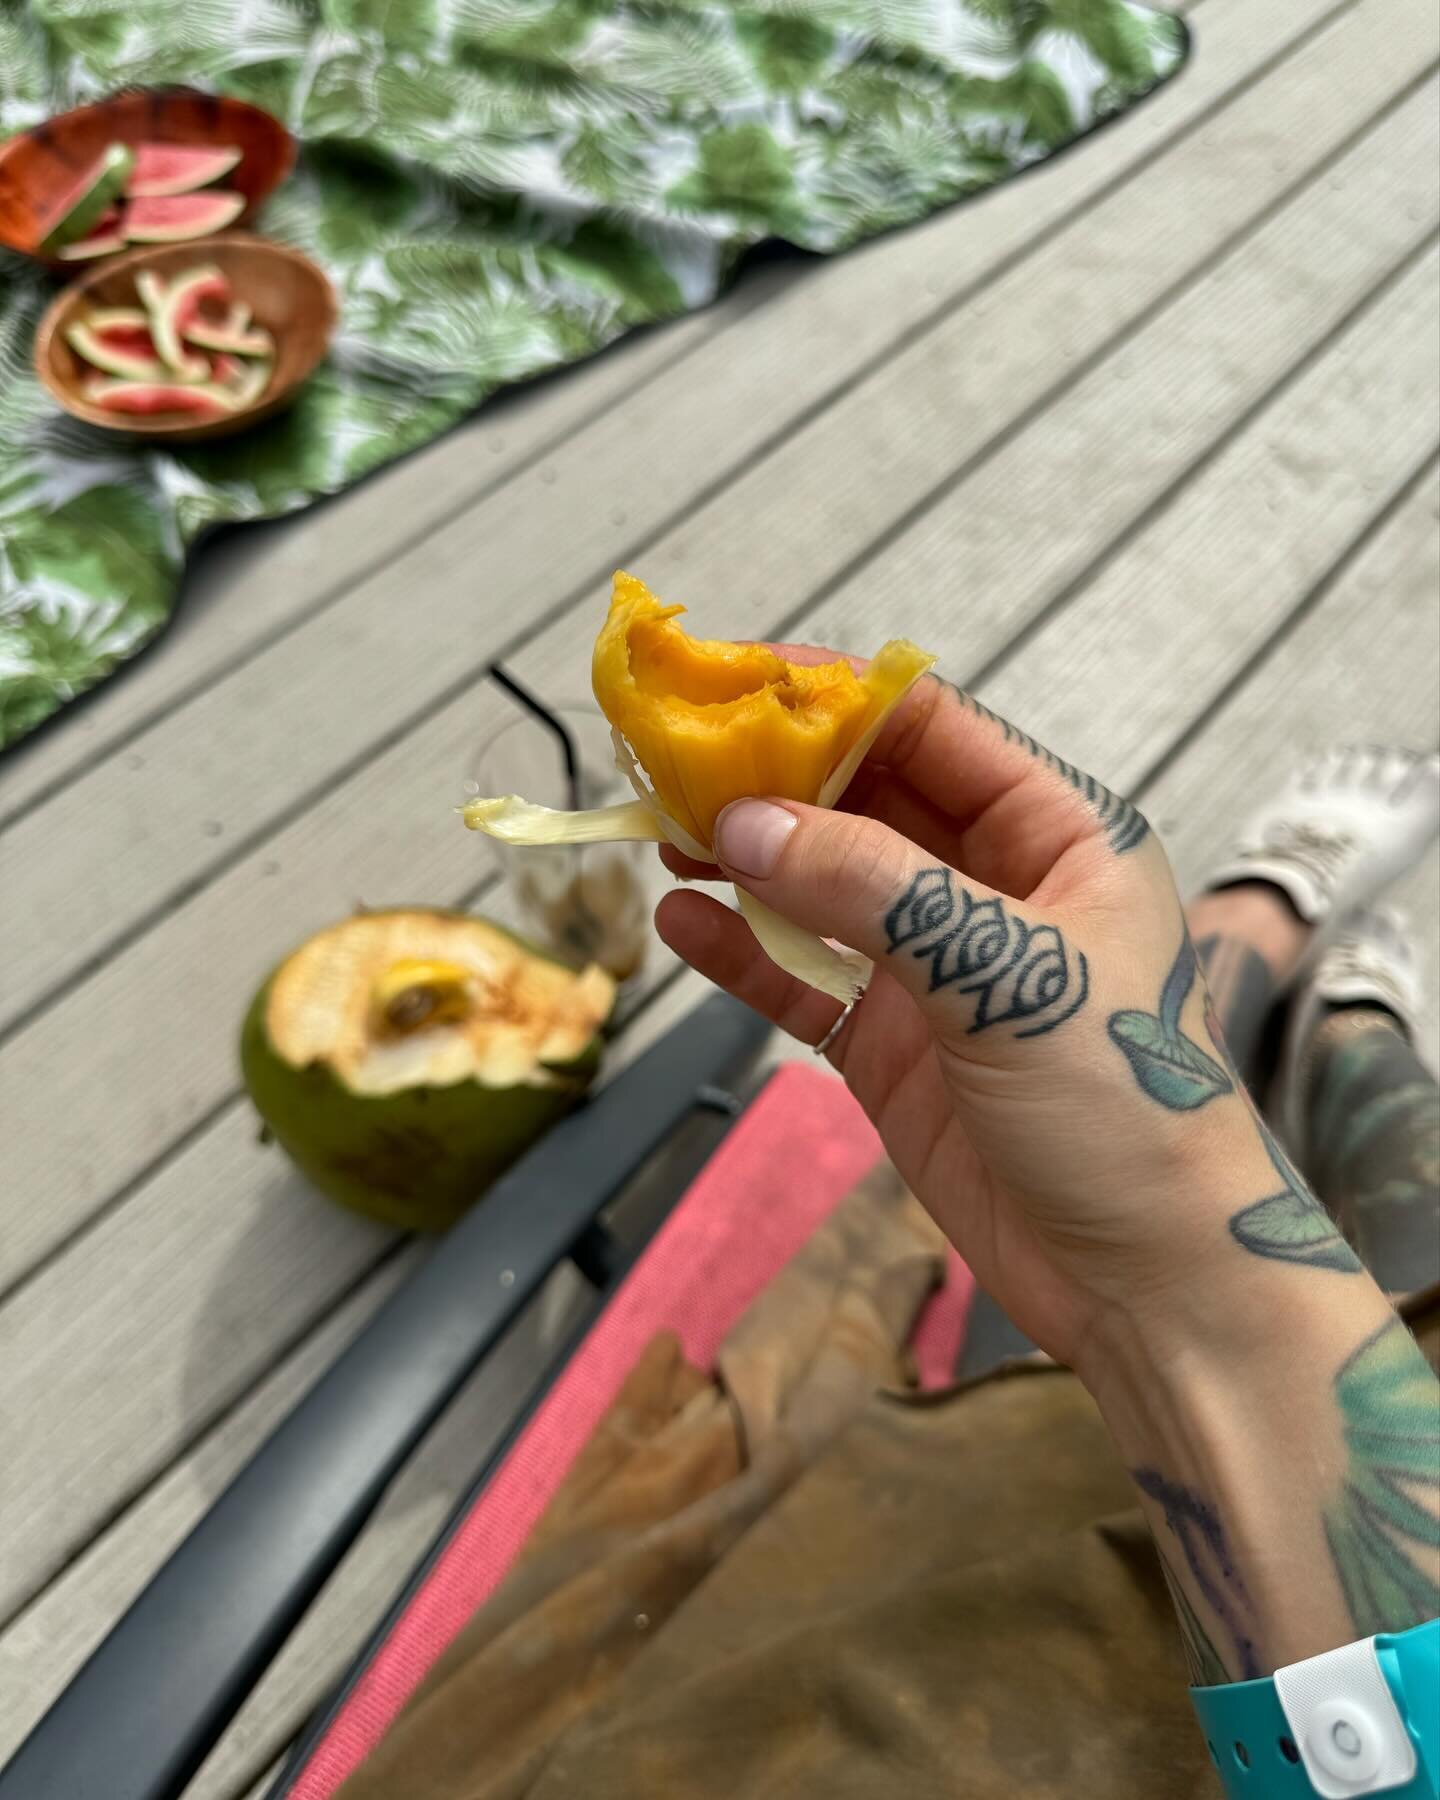 @thewoodstockfruitfestival 
First fruit festival , and best jackfruit I&rsquo;ve encountered. Grateful for new connections and fruity friends . @hom_miami is an epic space . 
#fruitarain #frugivore #fruitfestival #thewoodstockfruitfestival #woodstock